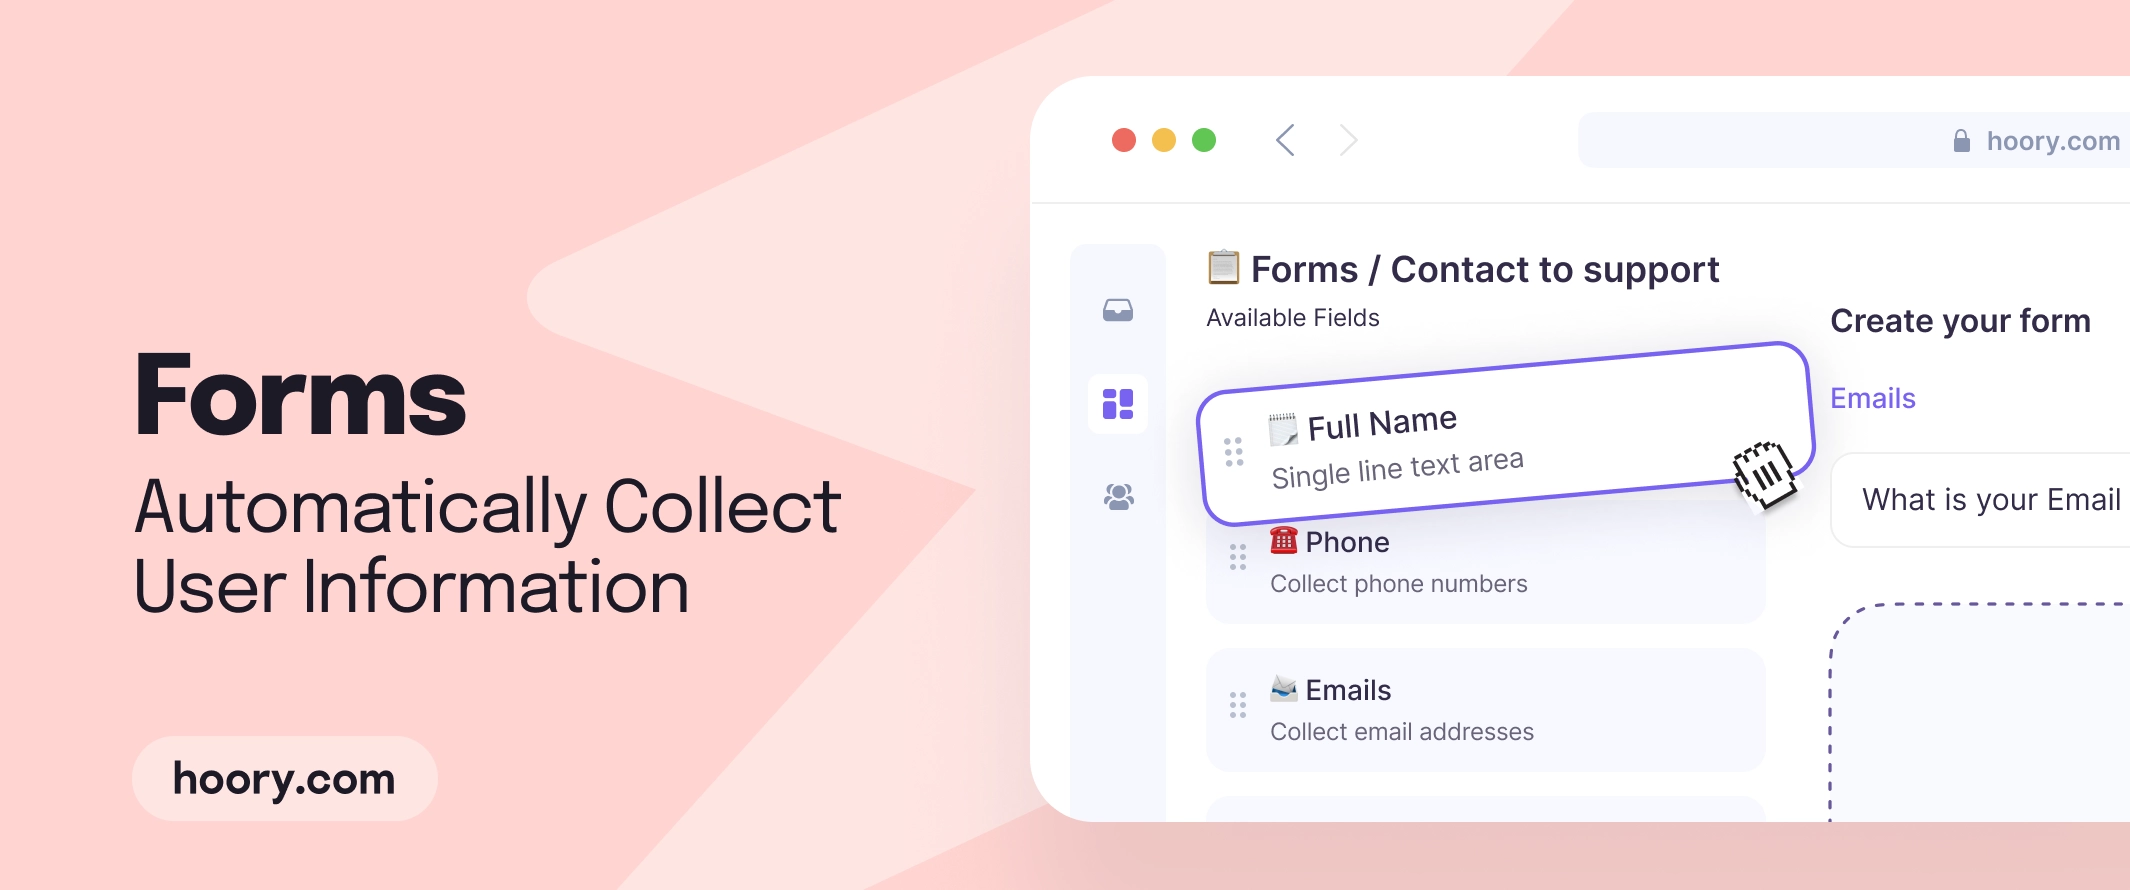 Forms: Automatically Collect User Information